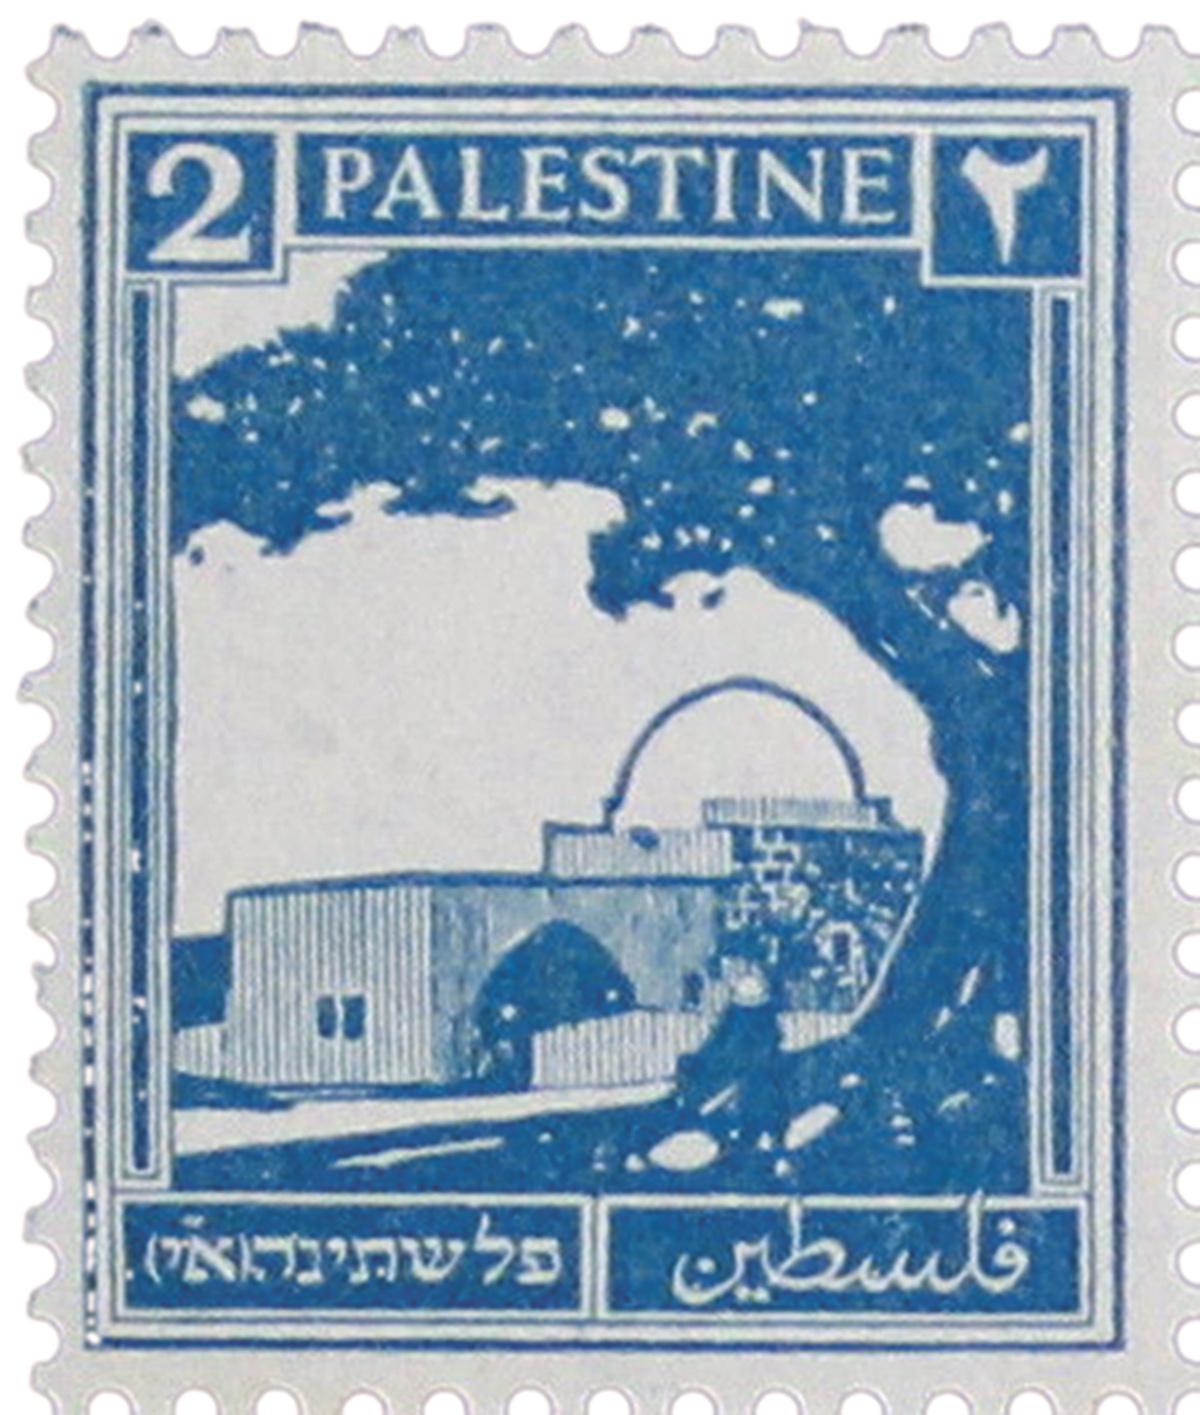 palestine-scott-64-rachels-tomb-1927-a-stamp-issued-by-the-british-mandatory-government-on-june-1-1927-designer-fred-tylor-source-wikimedia-britishgov